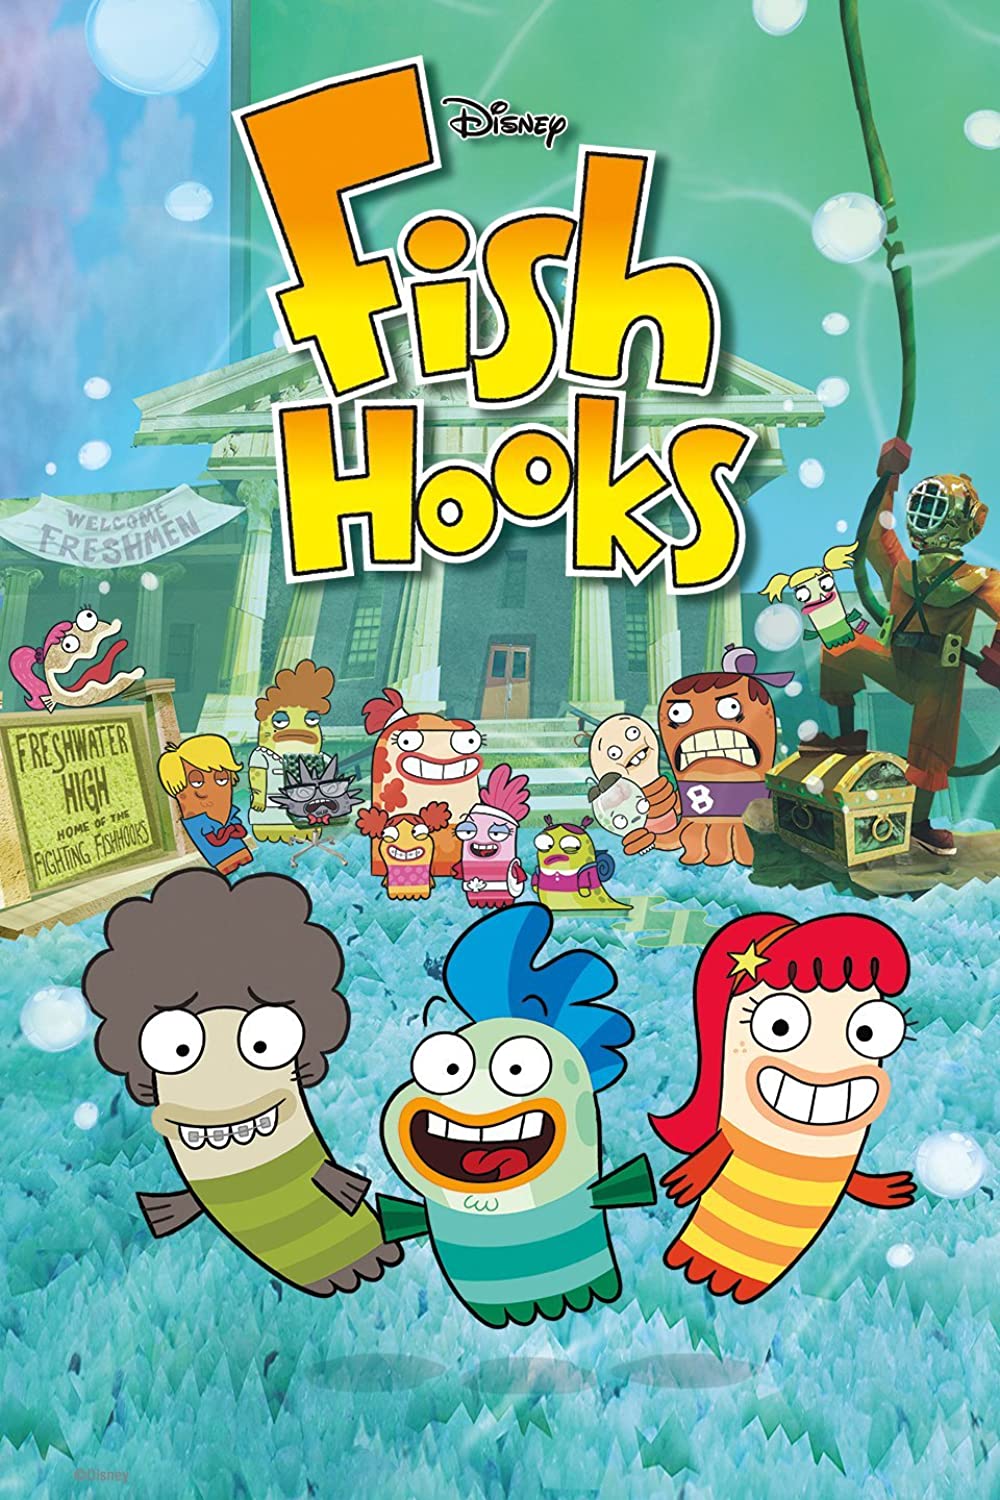 https://static.wikia.nocookie.net/international-entertainment-project/images/0/04/Fish_Hooks_-_poster.jpg/revision/latest?cb=20220515184952